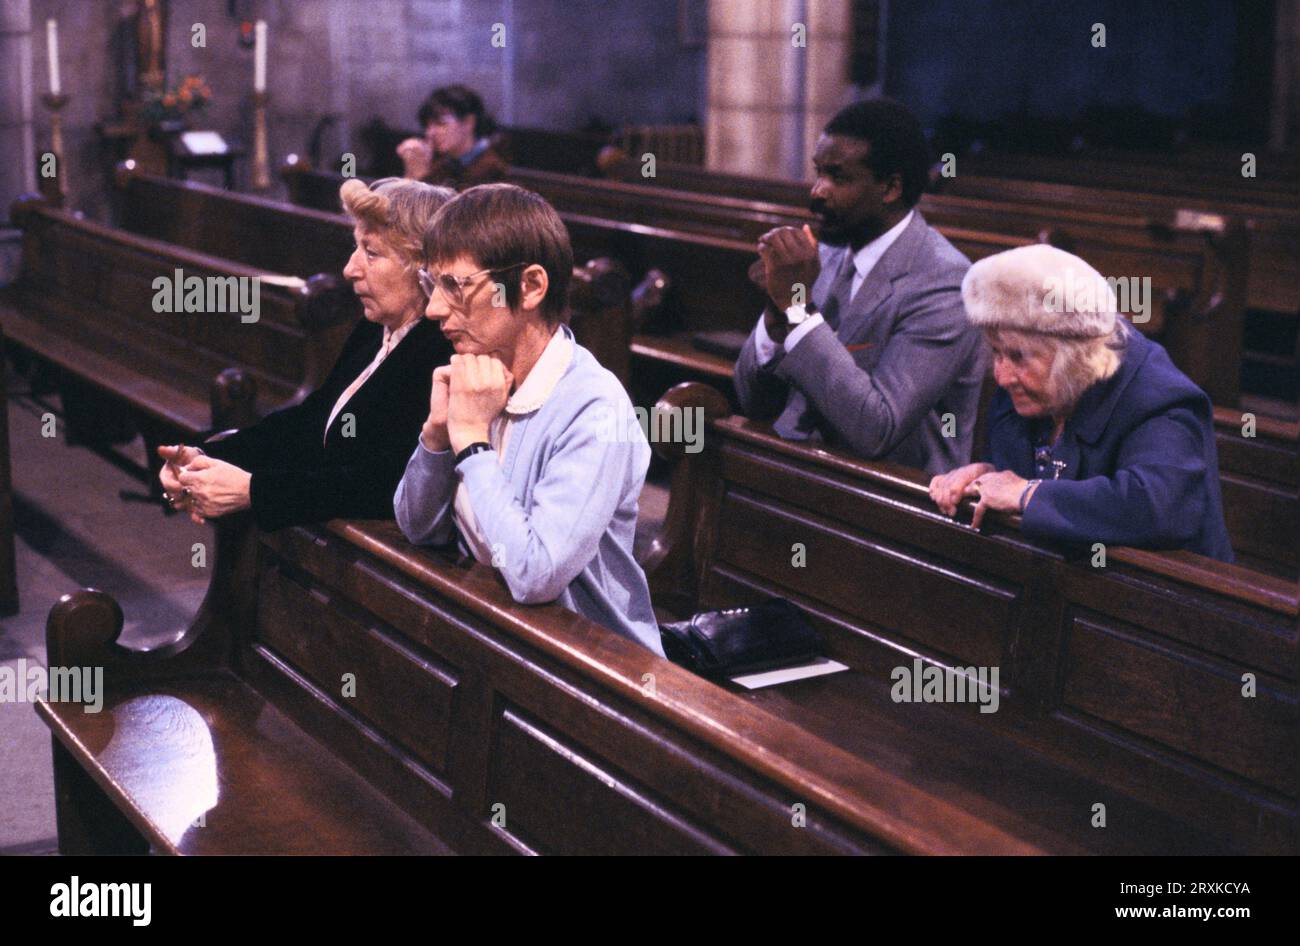 The Anglo-Catholic High Church of England, St John the Baptist Church,  Members of the congregation attend  Evening Prayer and Benediction at 6pm. Holland Park Road, Shepherd's Bush, London, England 1985 1980s UK HOMER SYKES Stock Photo